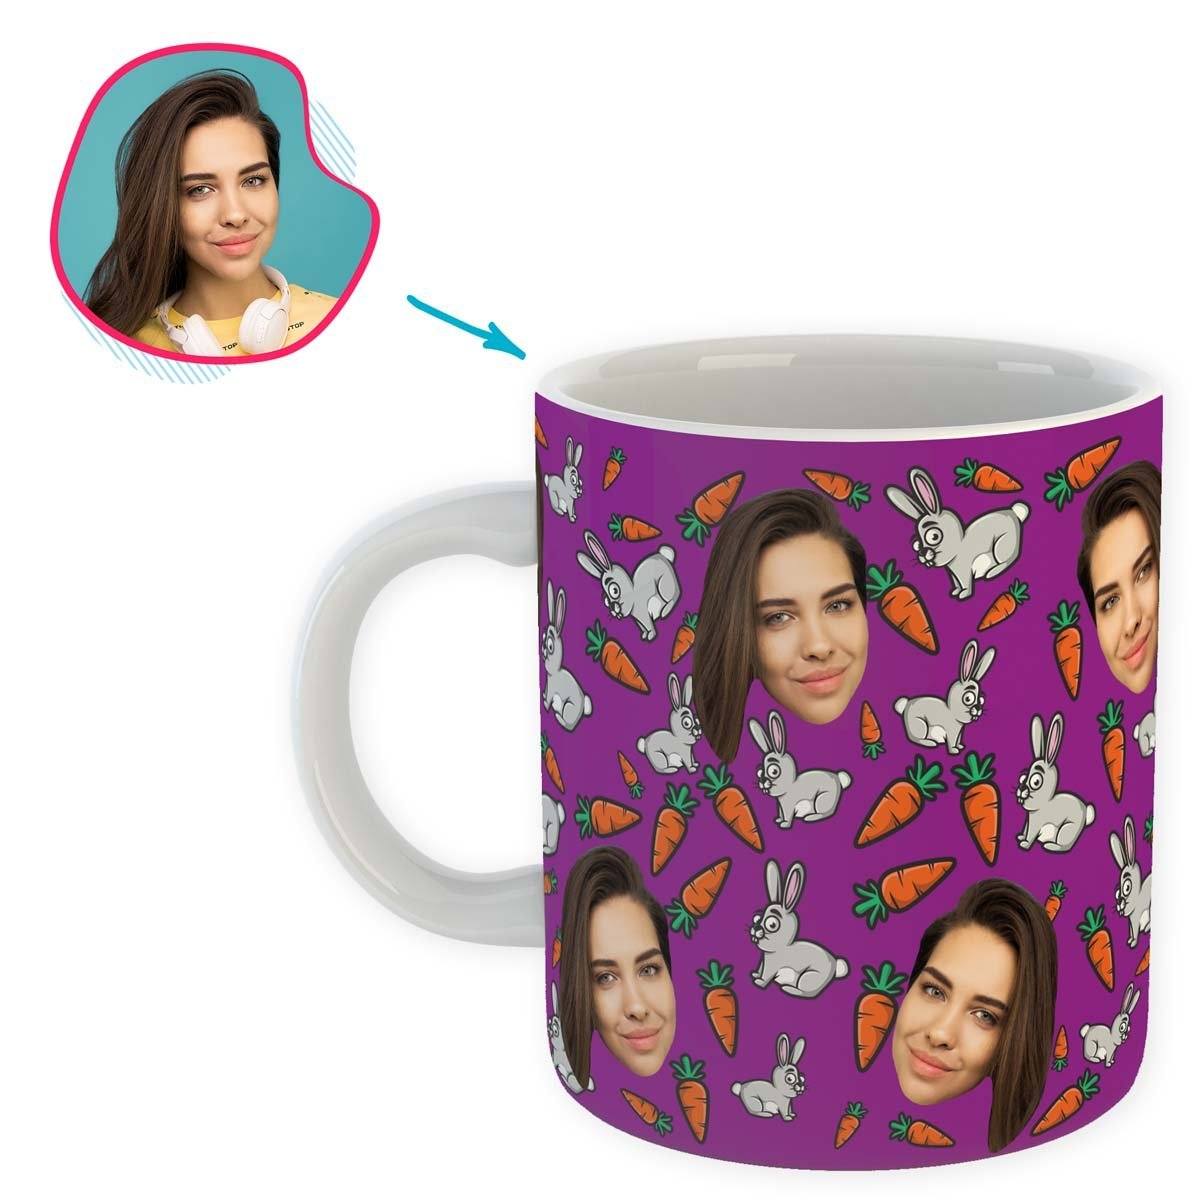 purple Bunny mug personalized with photo of face printed on it